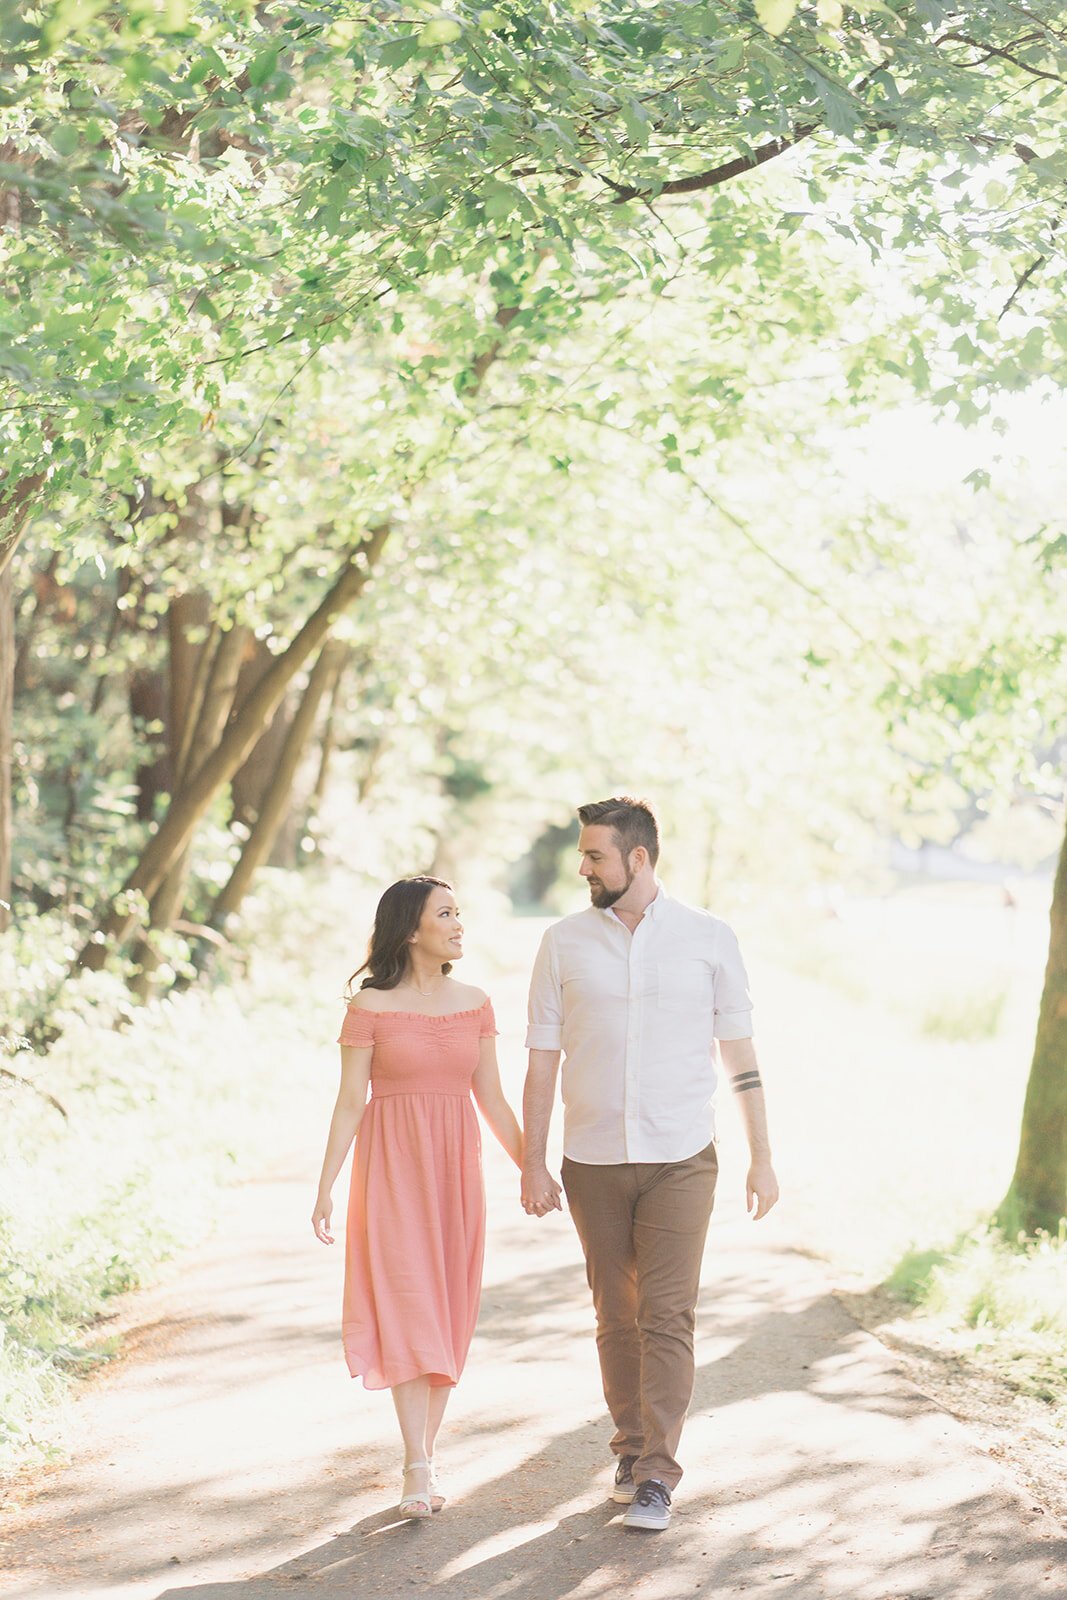 A beautiful woman in a pink dress holds her fiancee's hand as they stroll through the forest.